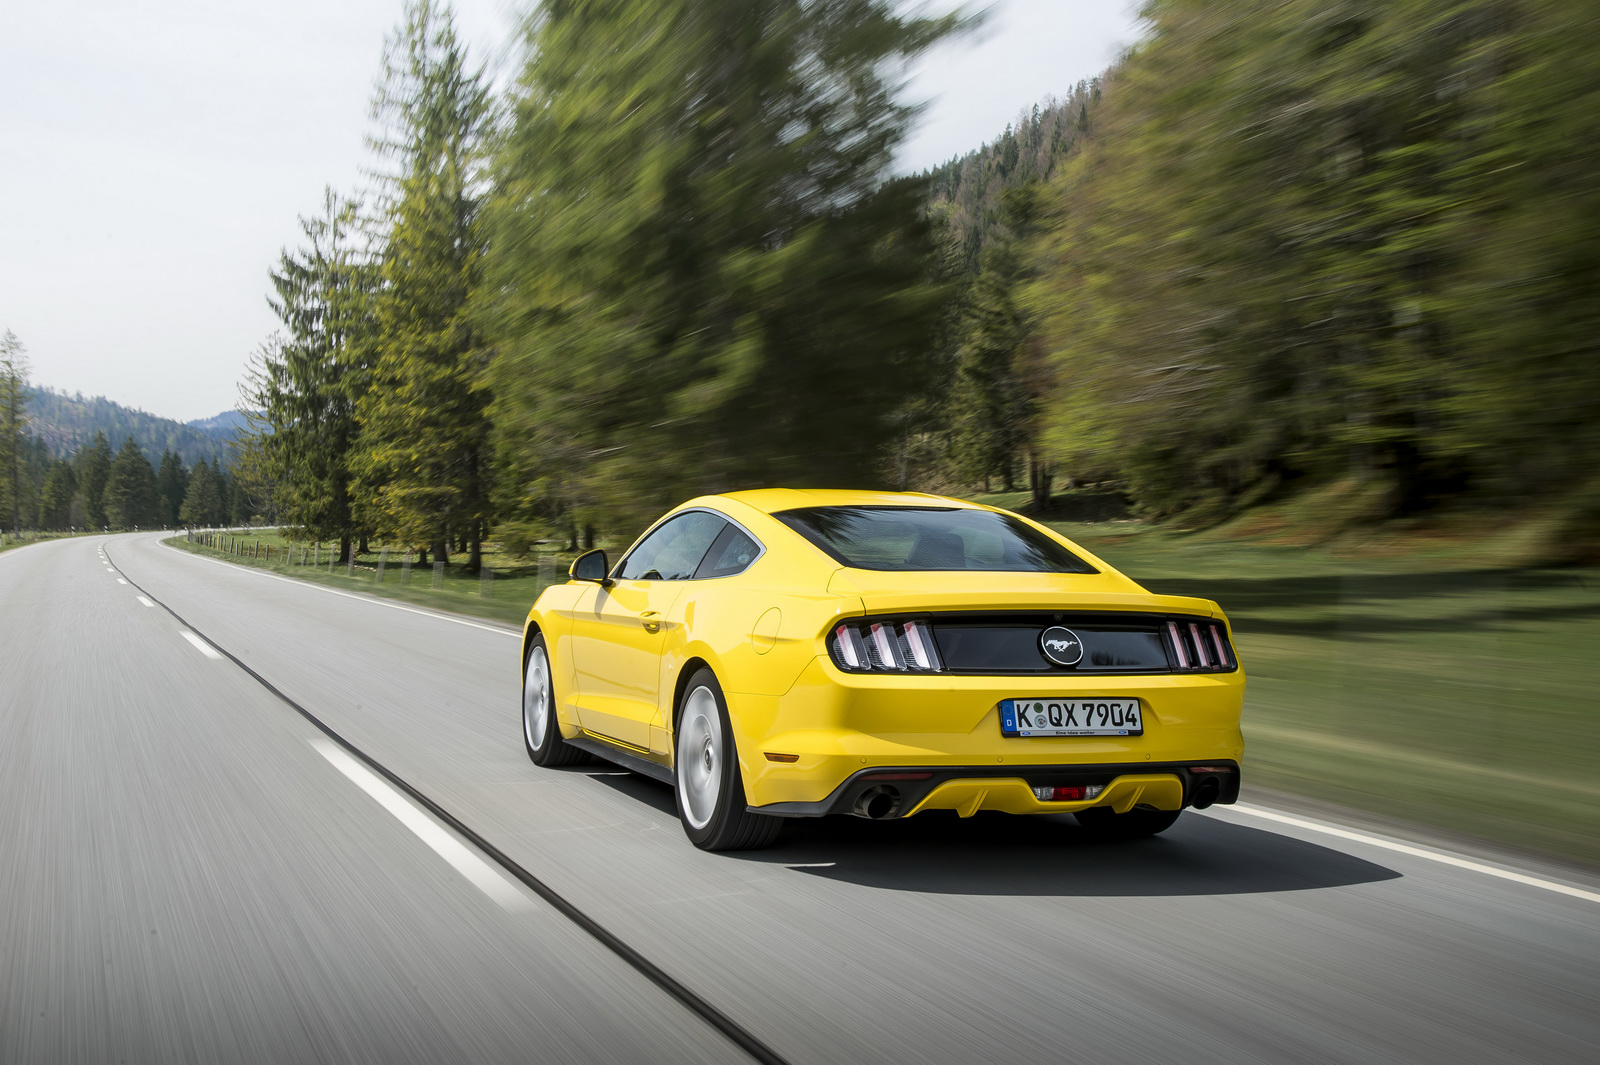 The Sixth generation Ford Mustang 